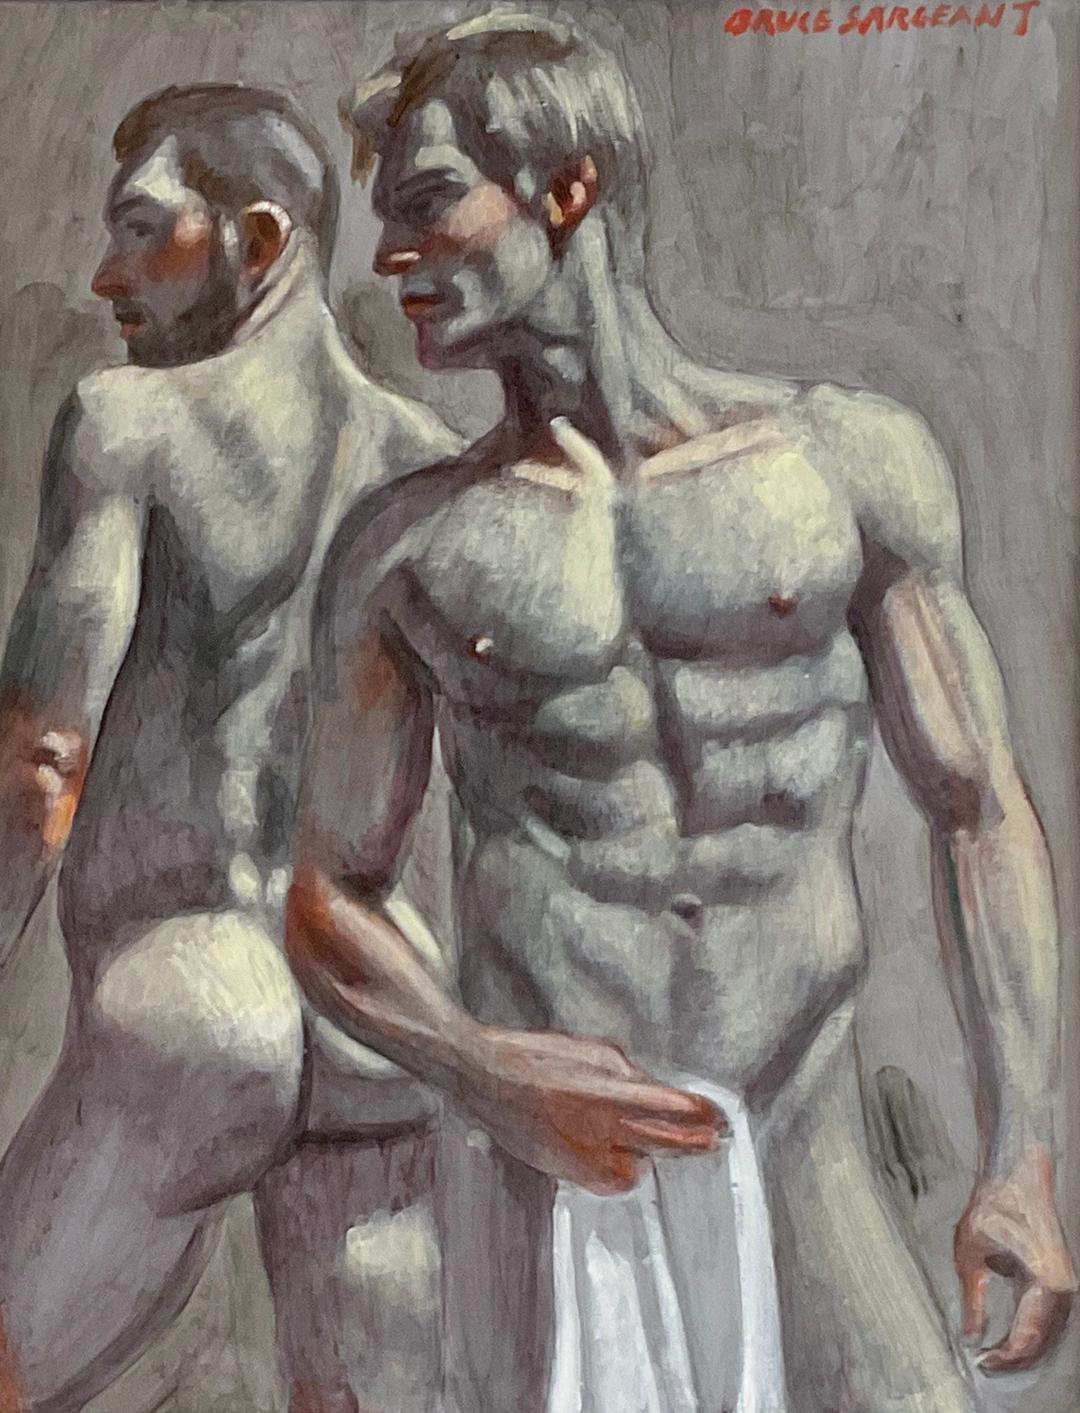 Brian & Chris (Figurative Painting of Two Nude Men by Mark Beard) 1